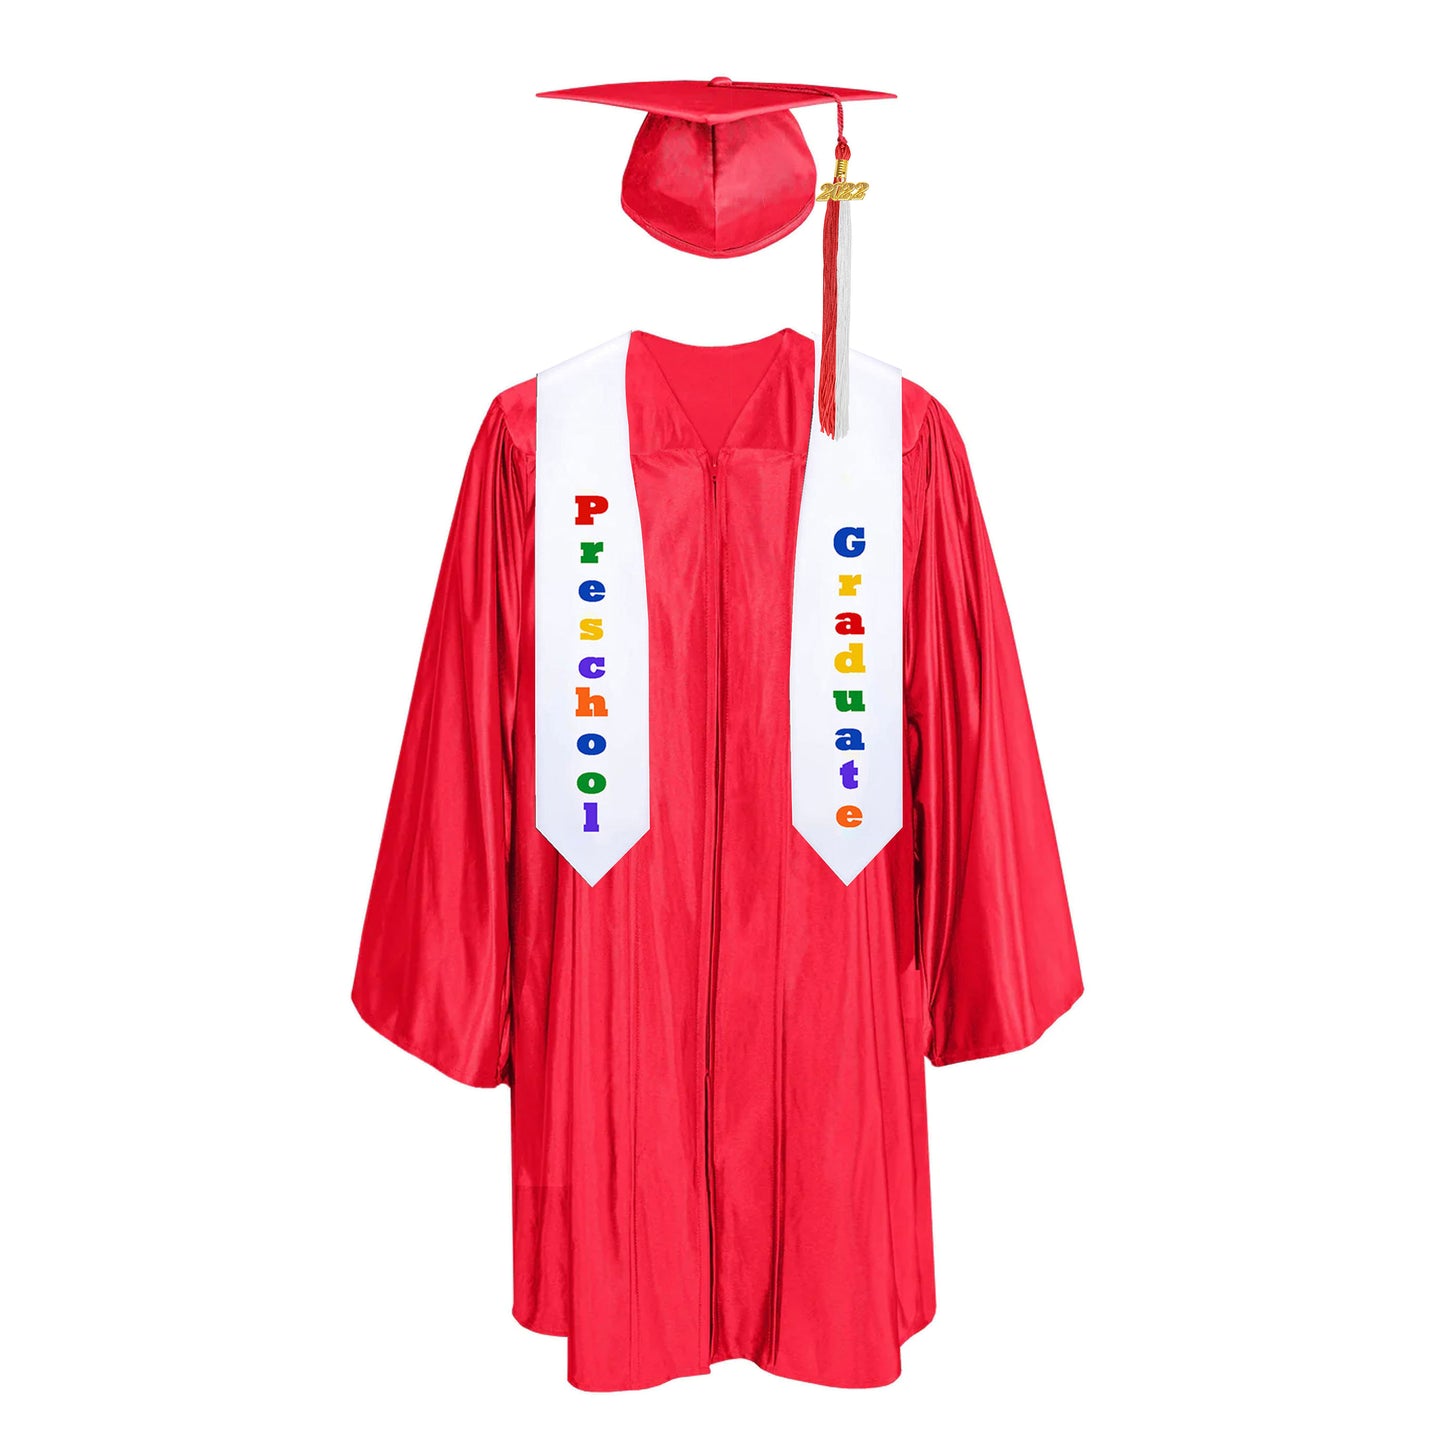 Graduation Kindergarten Gown and Caps with Colorful Tassels